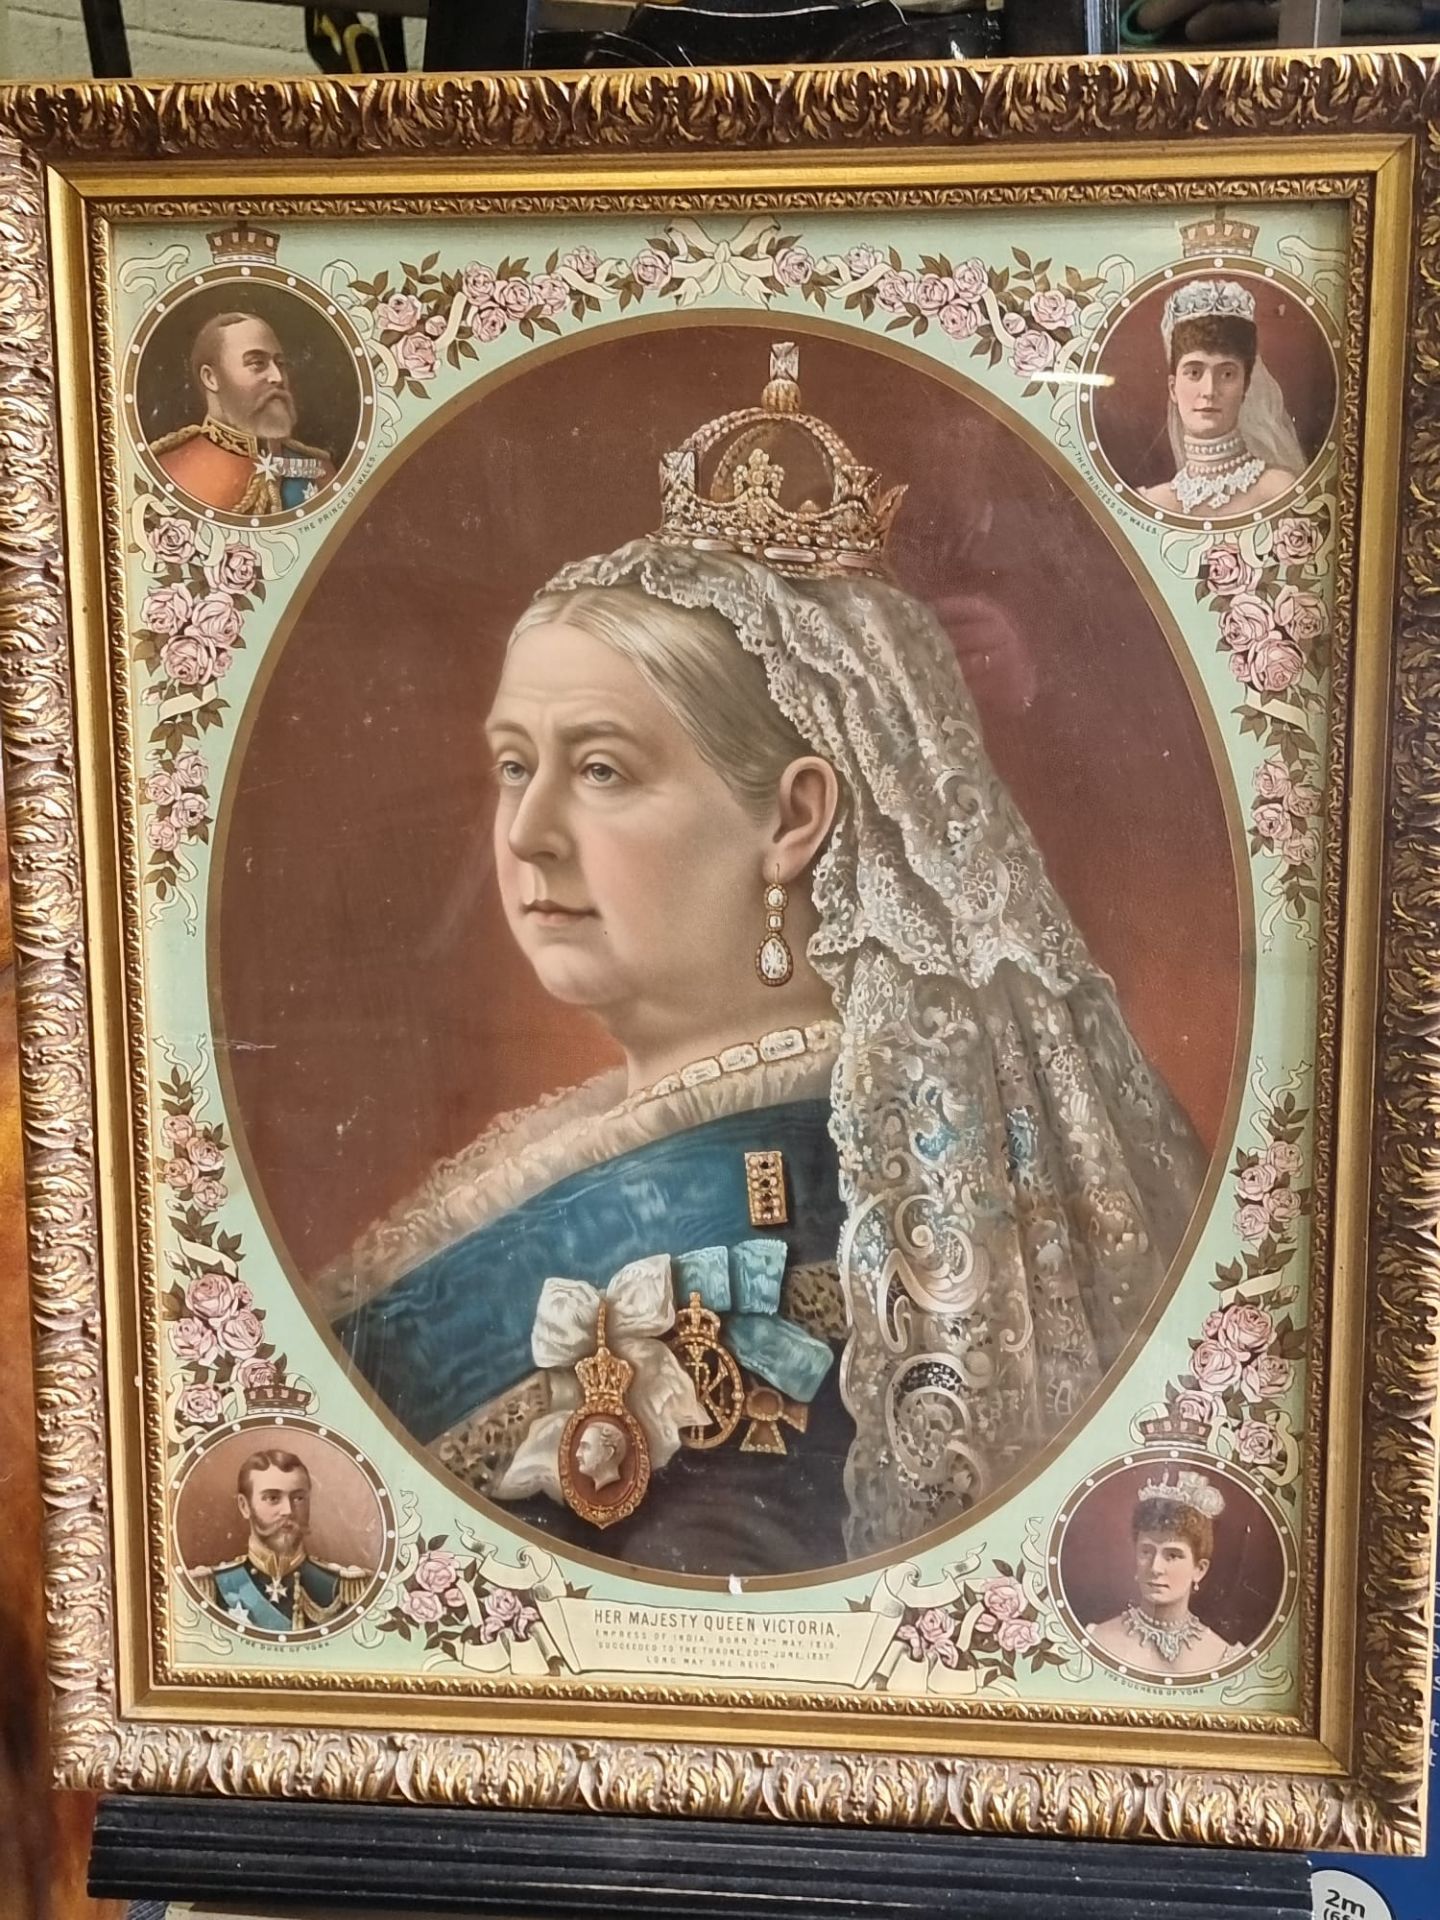 Queen Victoria Framed Print With Inscription Plate Under Her Majesty Queen Victoria Empress Of India - Image 8 of 9